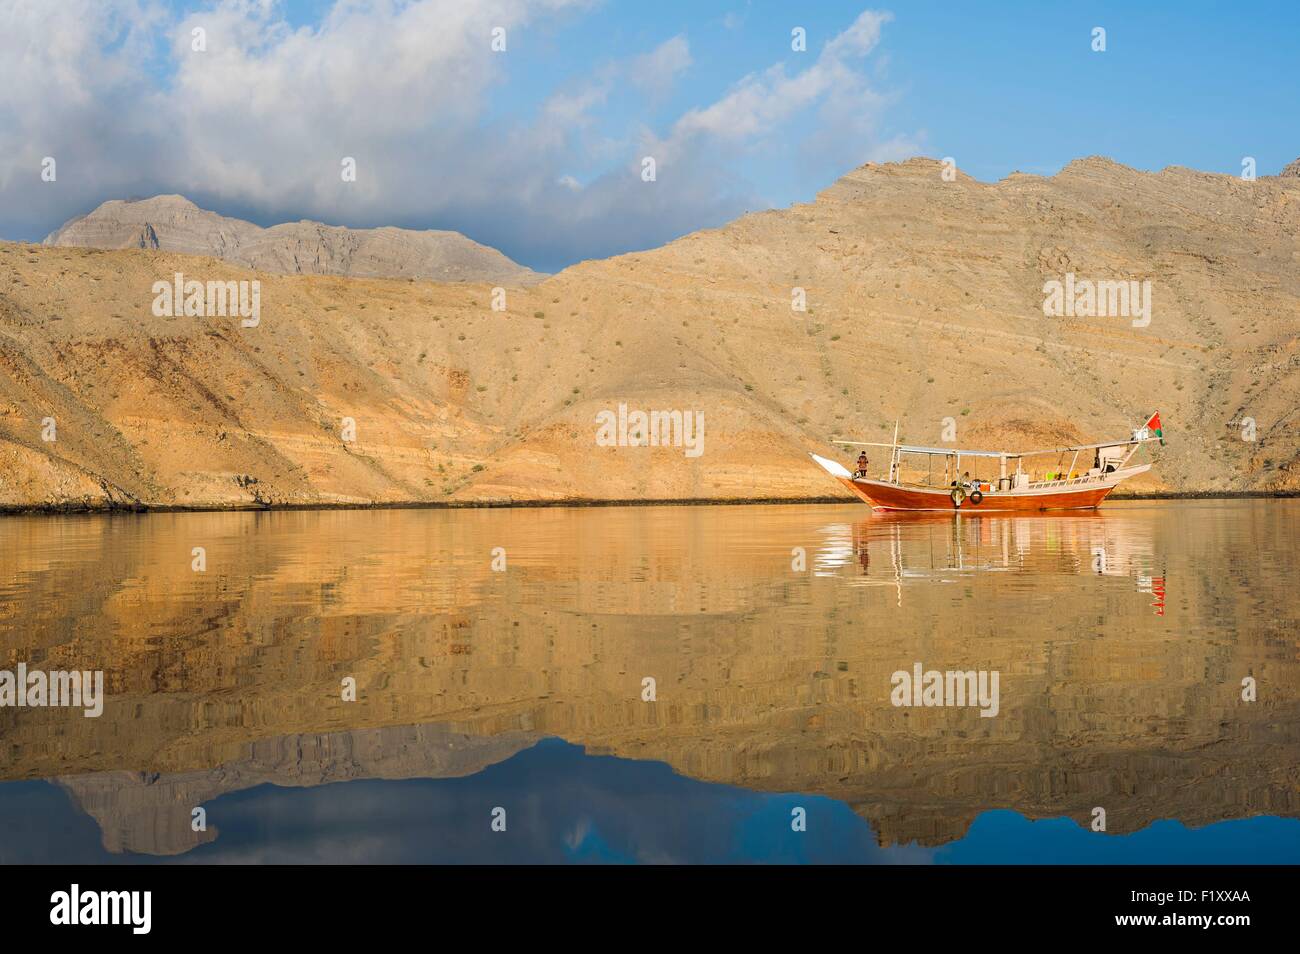 Oman, Khasab, Musandam, cruise in the fjords on a dhow, traditional wooden ship Stock Photo